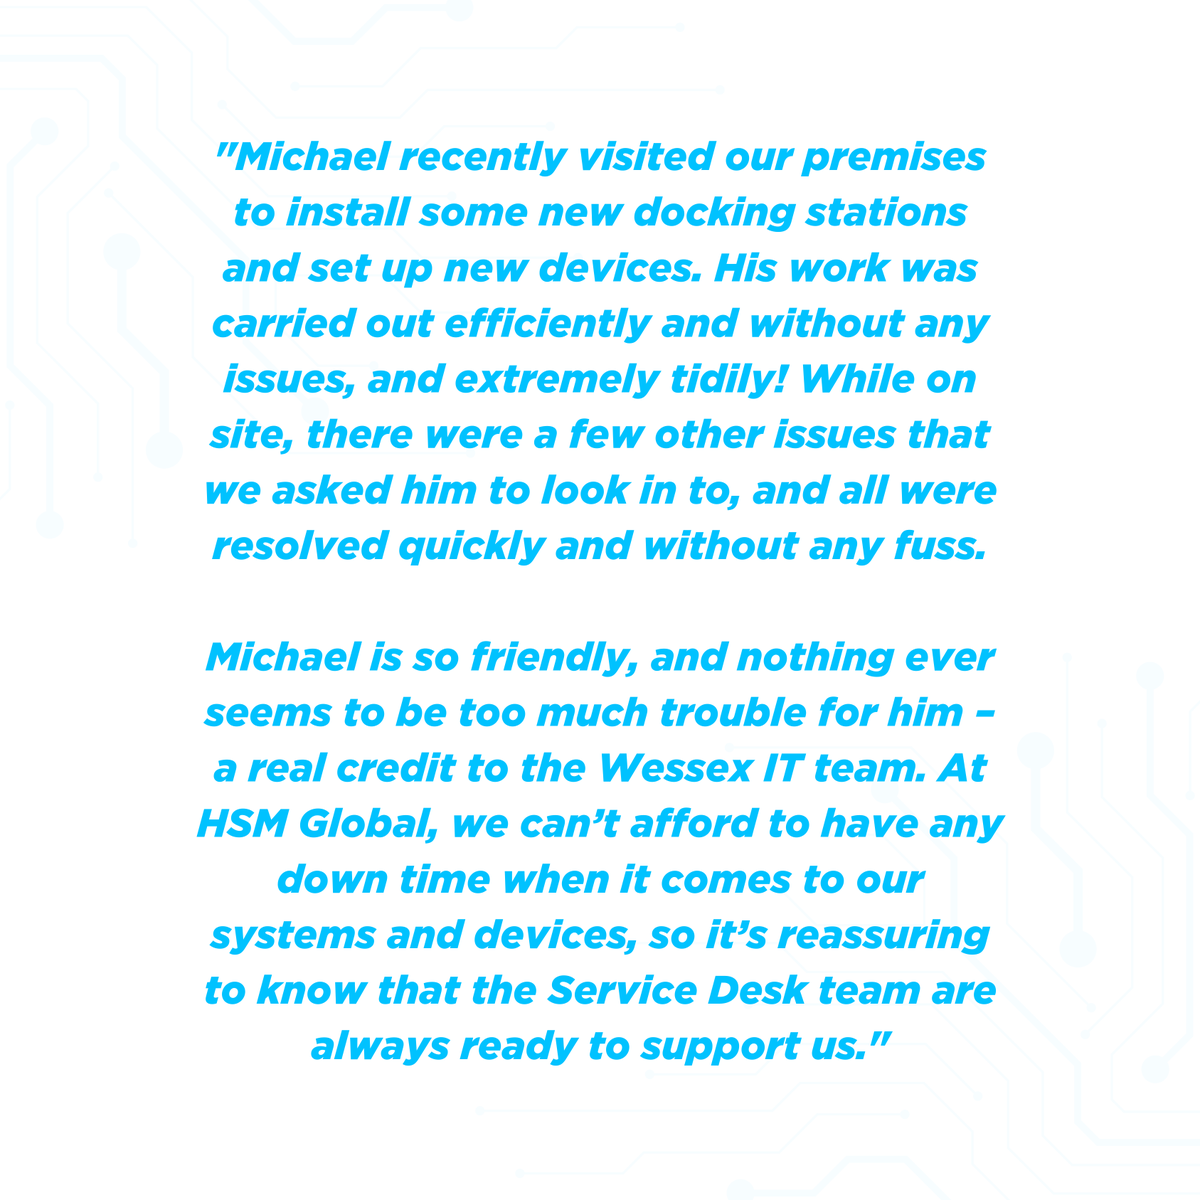 Thank you HSM Global Logistics for this testimonial!

#ITSupport #ITSupportWestSussex #WestSussex #ITSupportSussex #Sussex #ITSupportSurrey #Surrey #MSP #Engineer #LaptopDock #DockingStation #ClutterFree #ClientSupport #CableManagement #ITAudit #ITServices #ManagedITServices